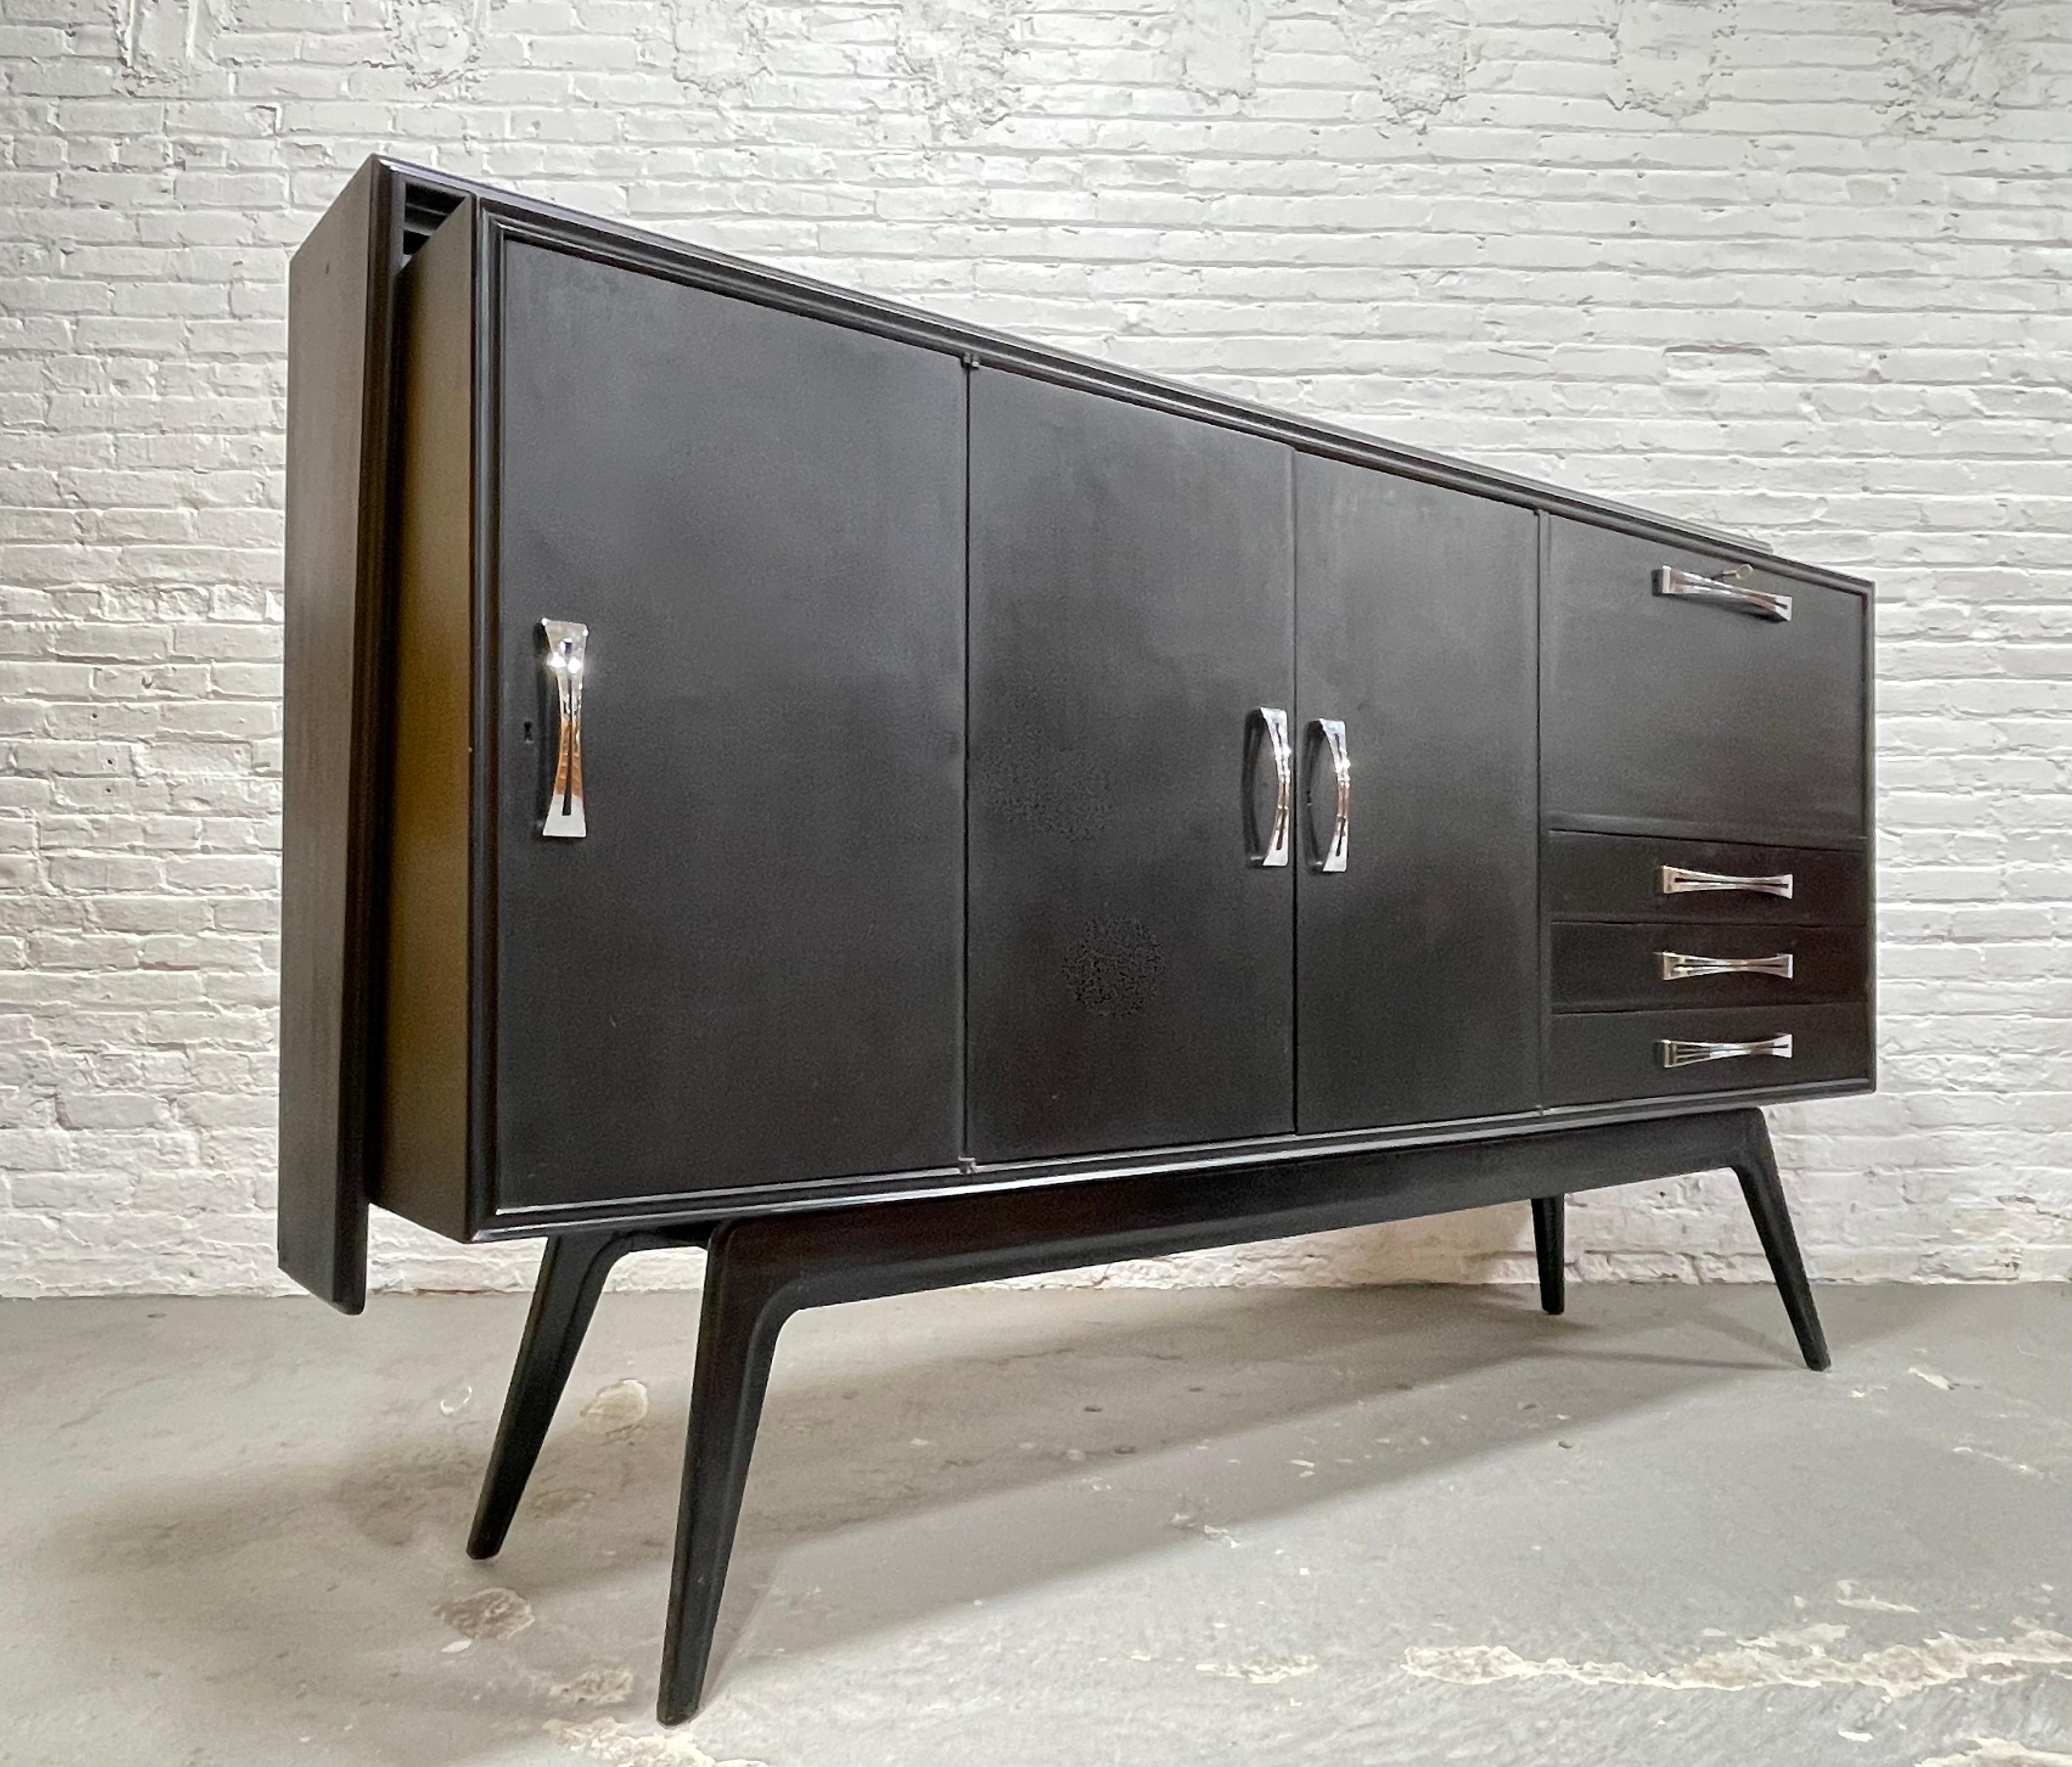 Extra Long Italian Mid Century Modern Ebonized Highboard Credenza / Sideboard / Bar, c. 1960's. This imposing piece is beautifully ebonized in matte black with beech interior and will easily be the highlight of any room.  This beauty offers a wealth